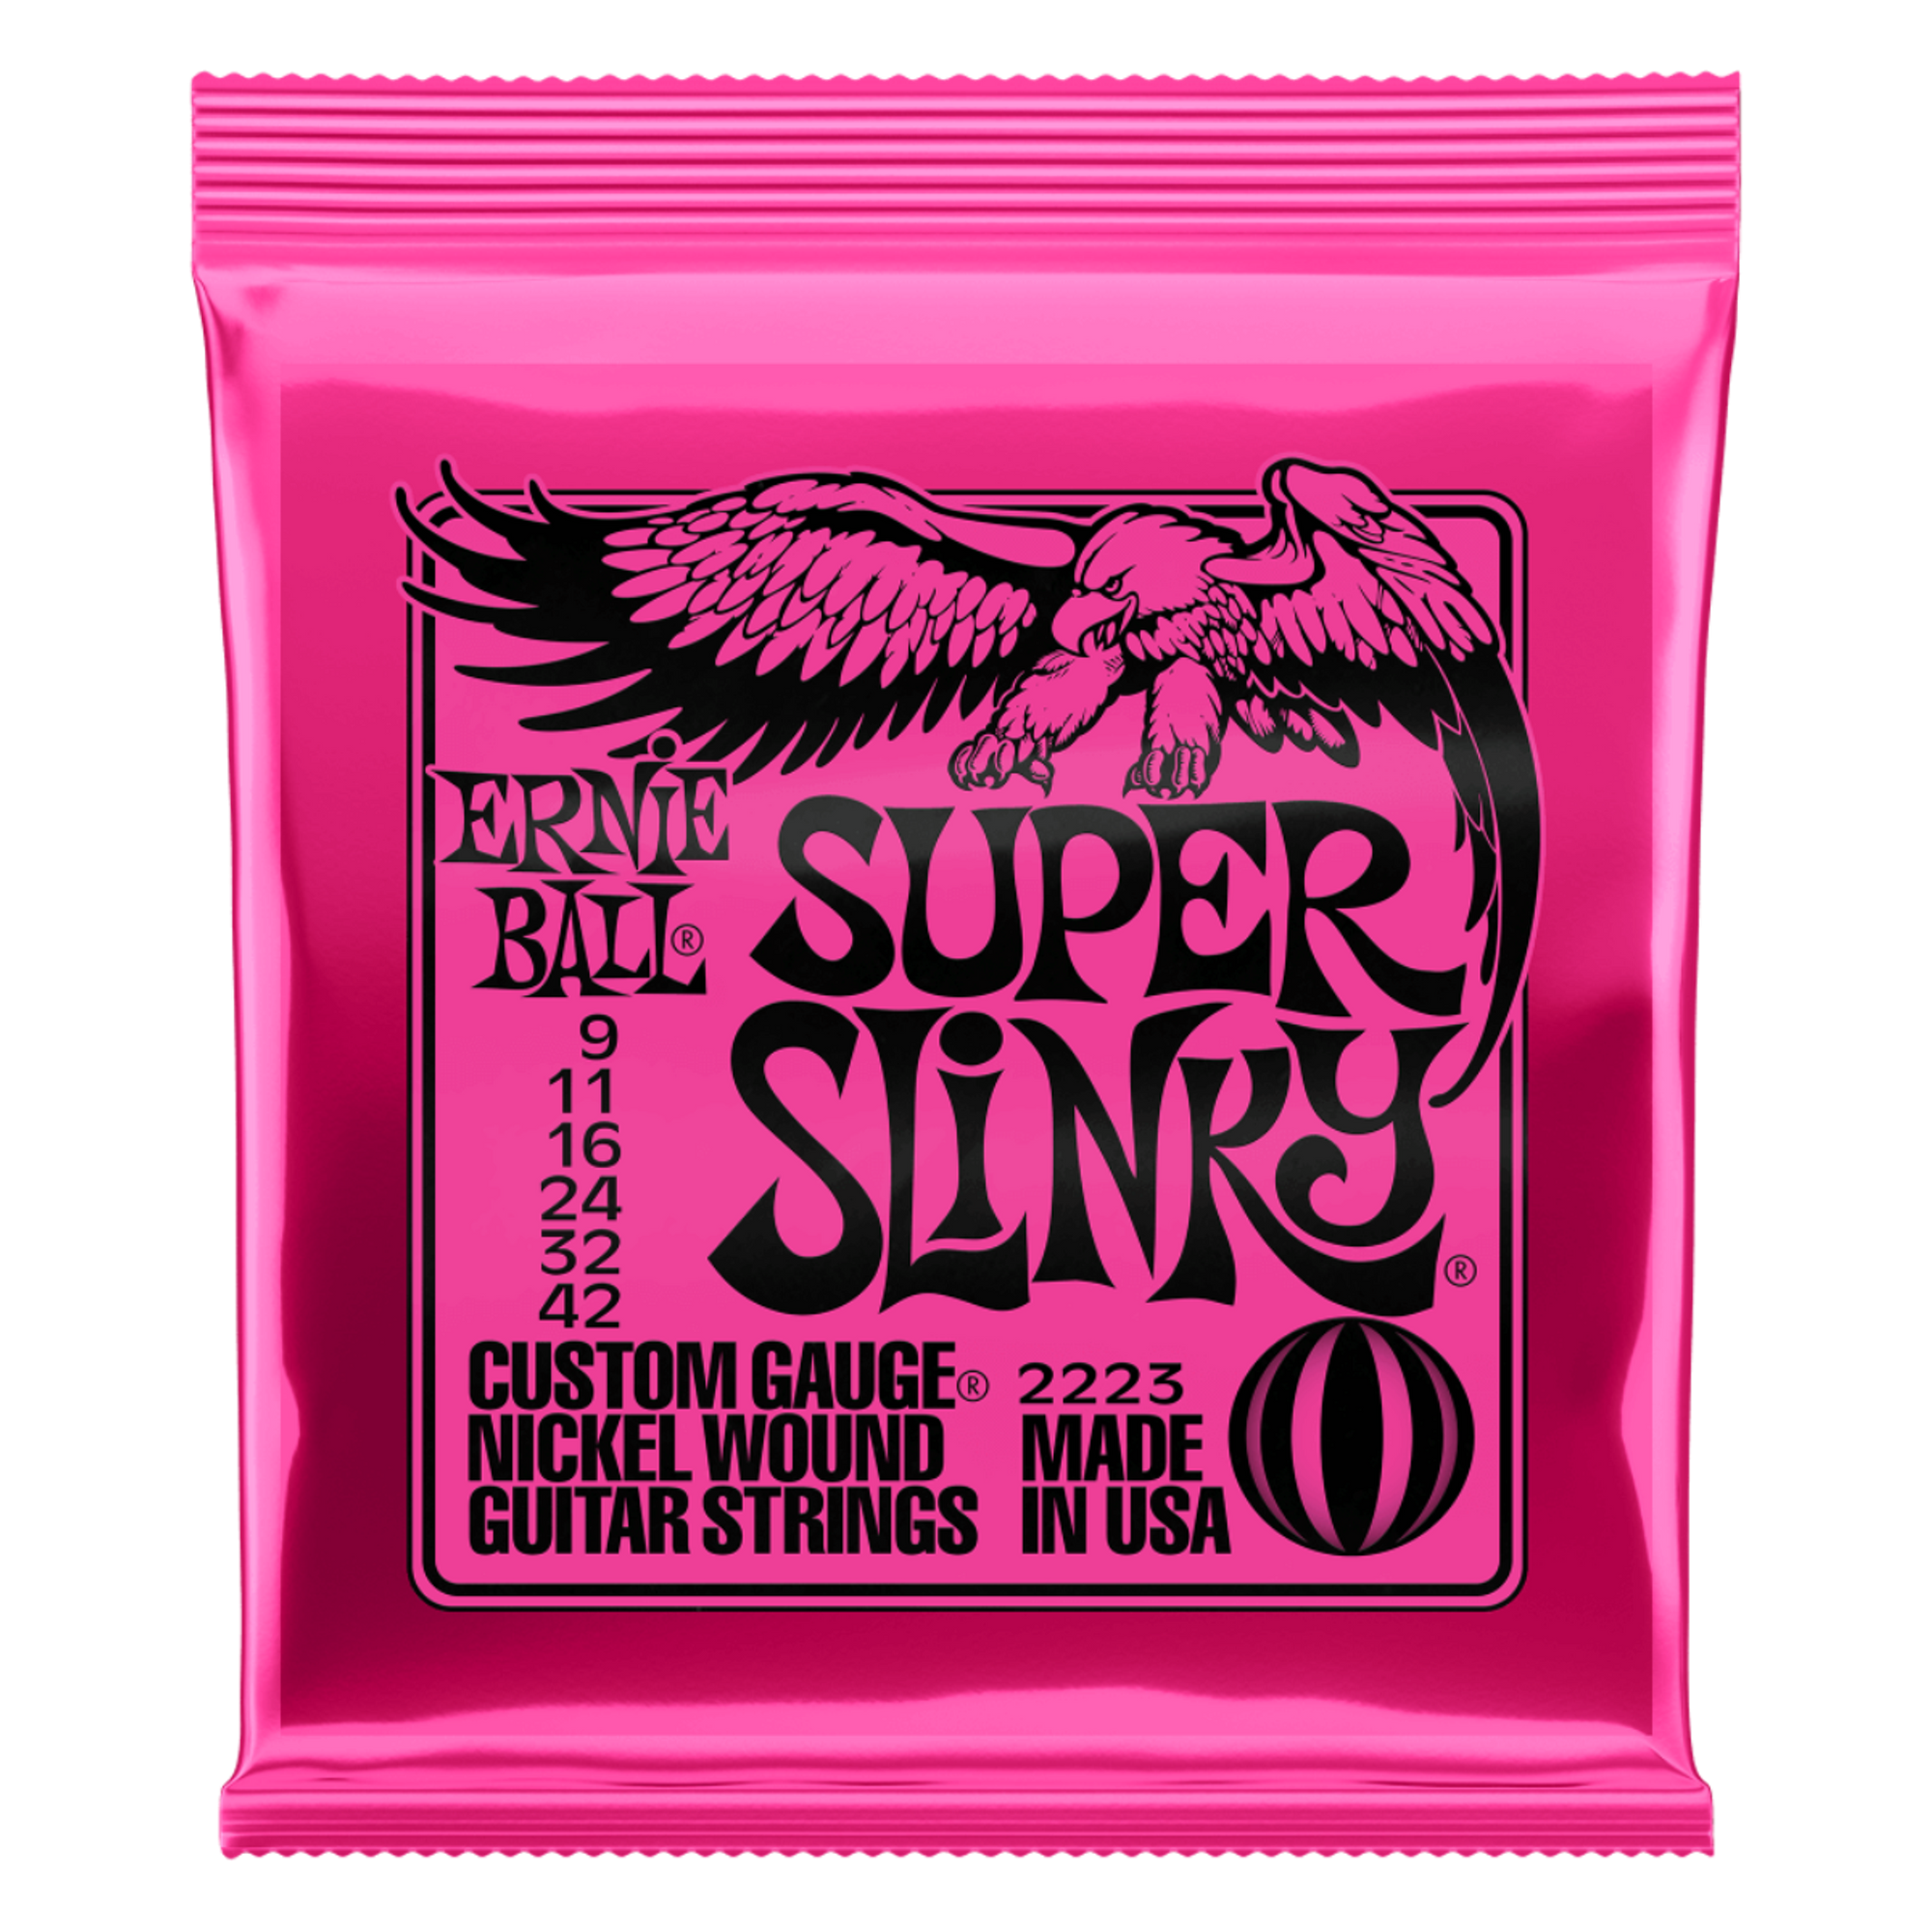 Ernie Ball Nickel Wound Electric Guitar Strings are made from nickel plated steel wire wrapped around tin plated hex shaped steel core wire. The plain strings are made of specially tempered tin plated high carbon steel producing a well balanced tone for your guitar.